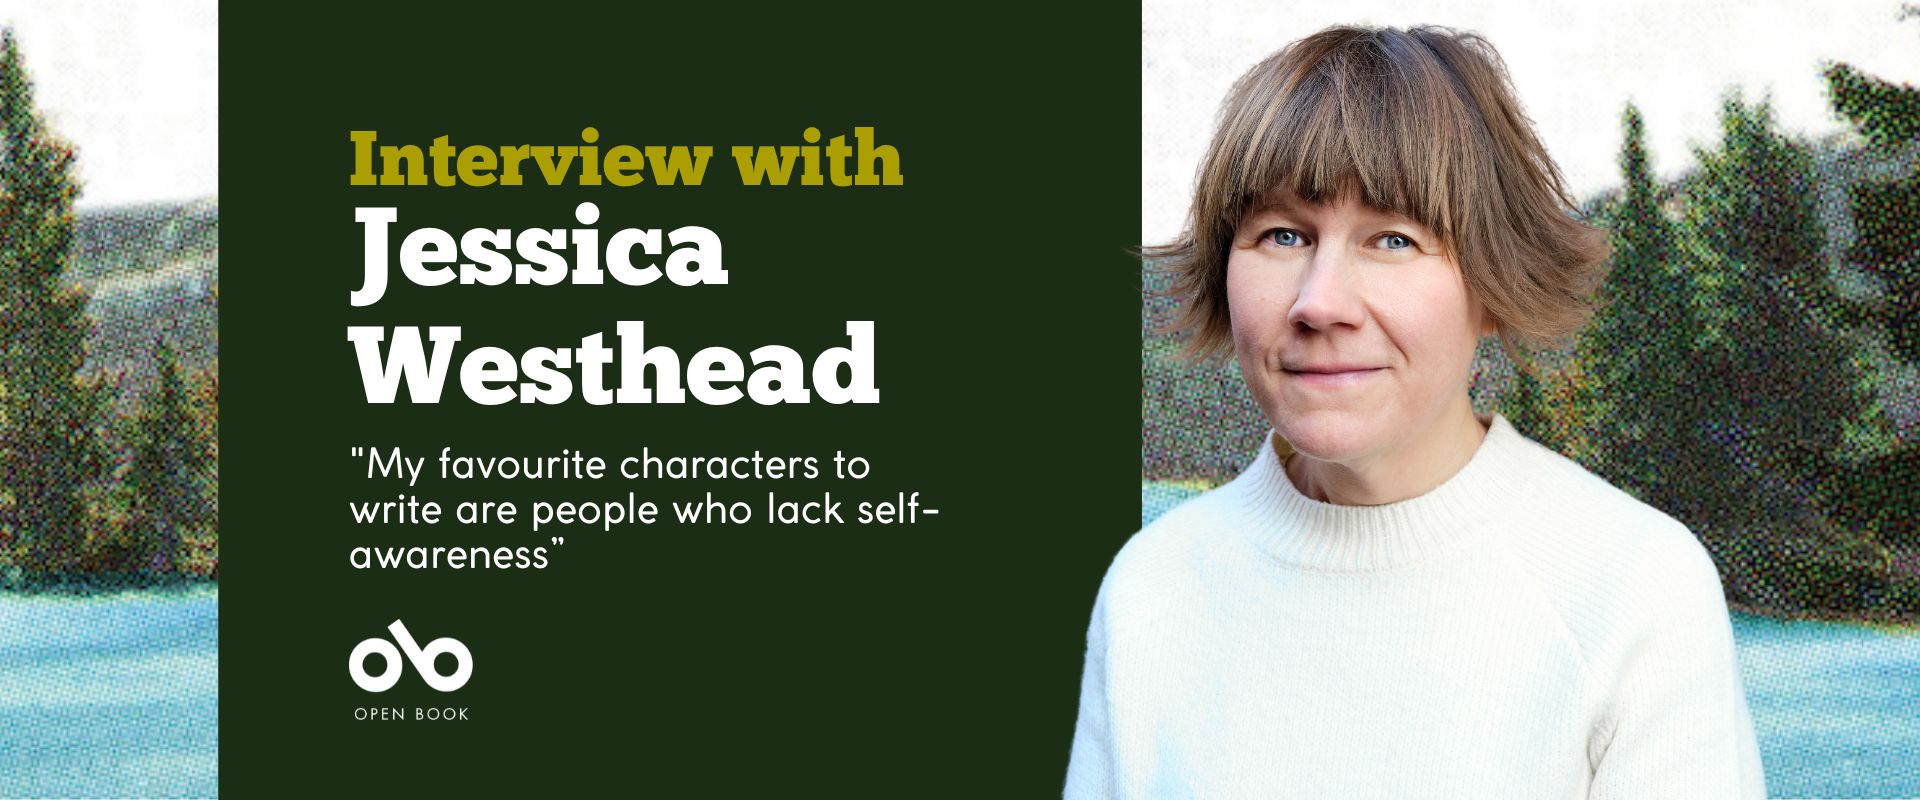 Banner image with photo of writer Jessica Westhead and wooded background. Text reads "interview with Jessica Westhead. My favourite characters to write are people who lack self-awareness”. Open Book logo bottom left